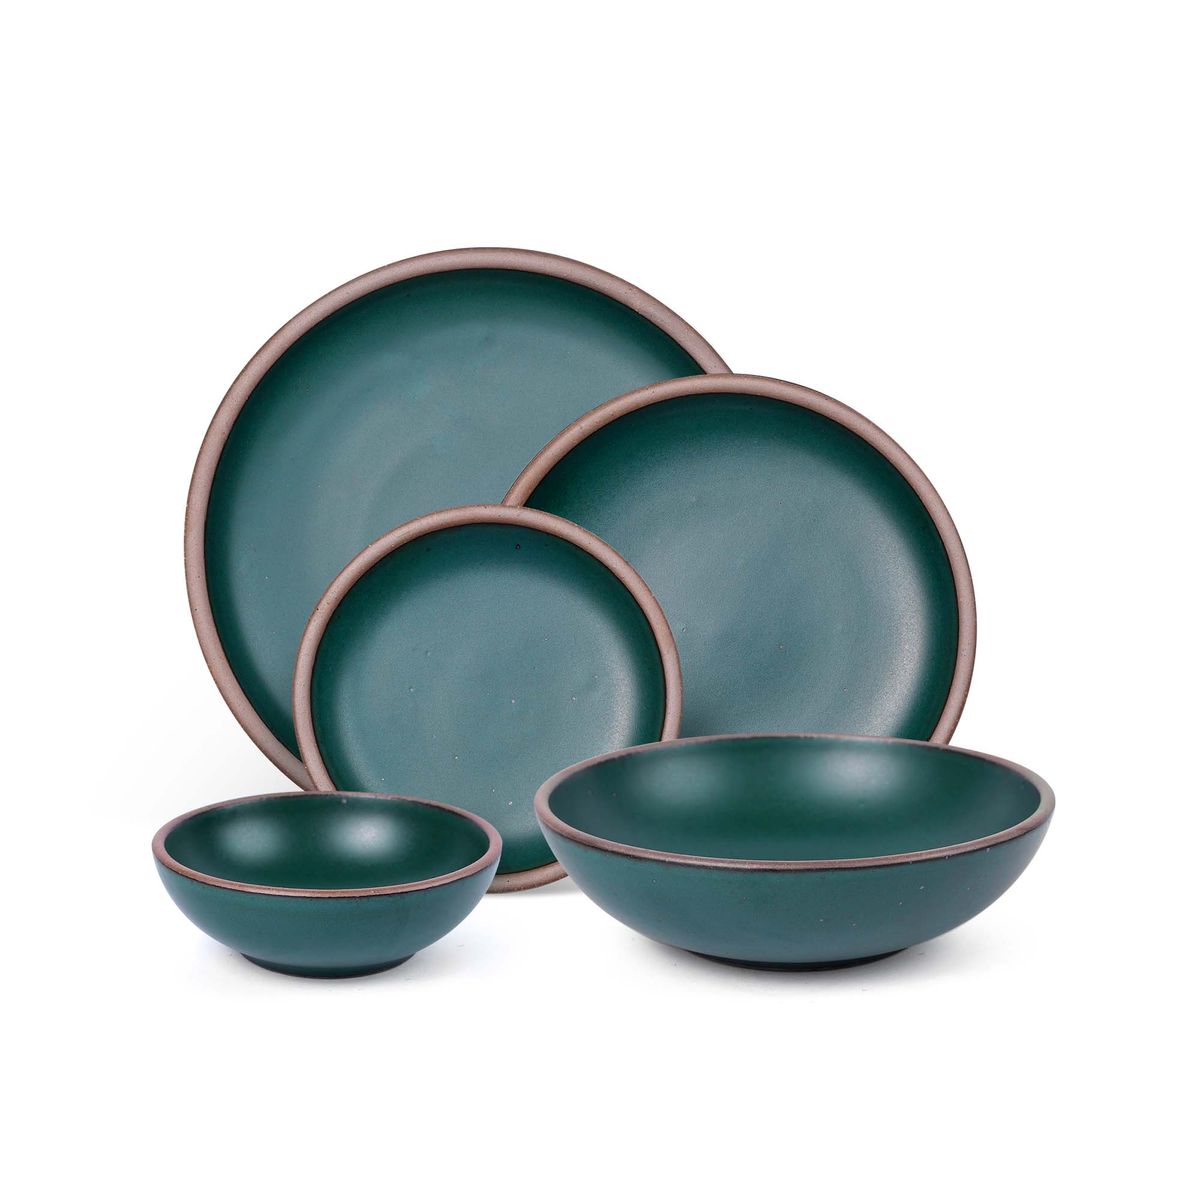 A breakfast bowl, everyday bowl, cake plate, side plate and dinner plate paired together in a deep dark teal featuring iron speckles